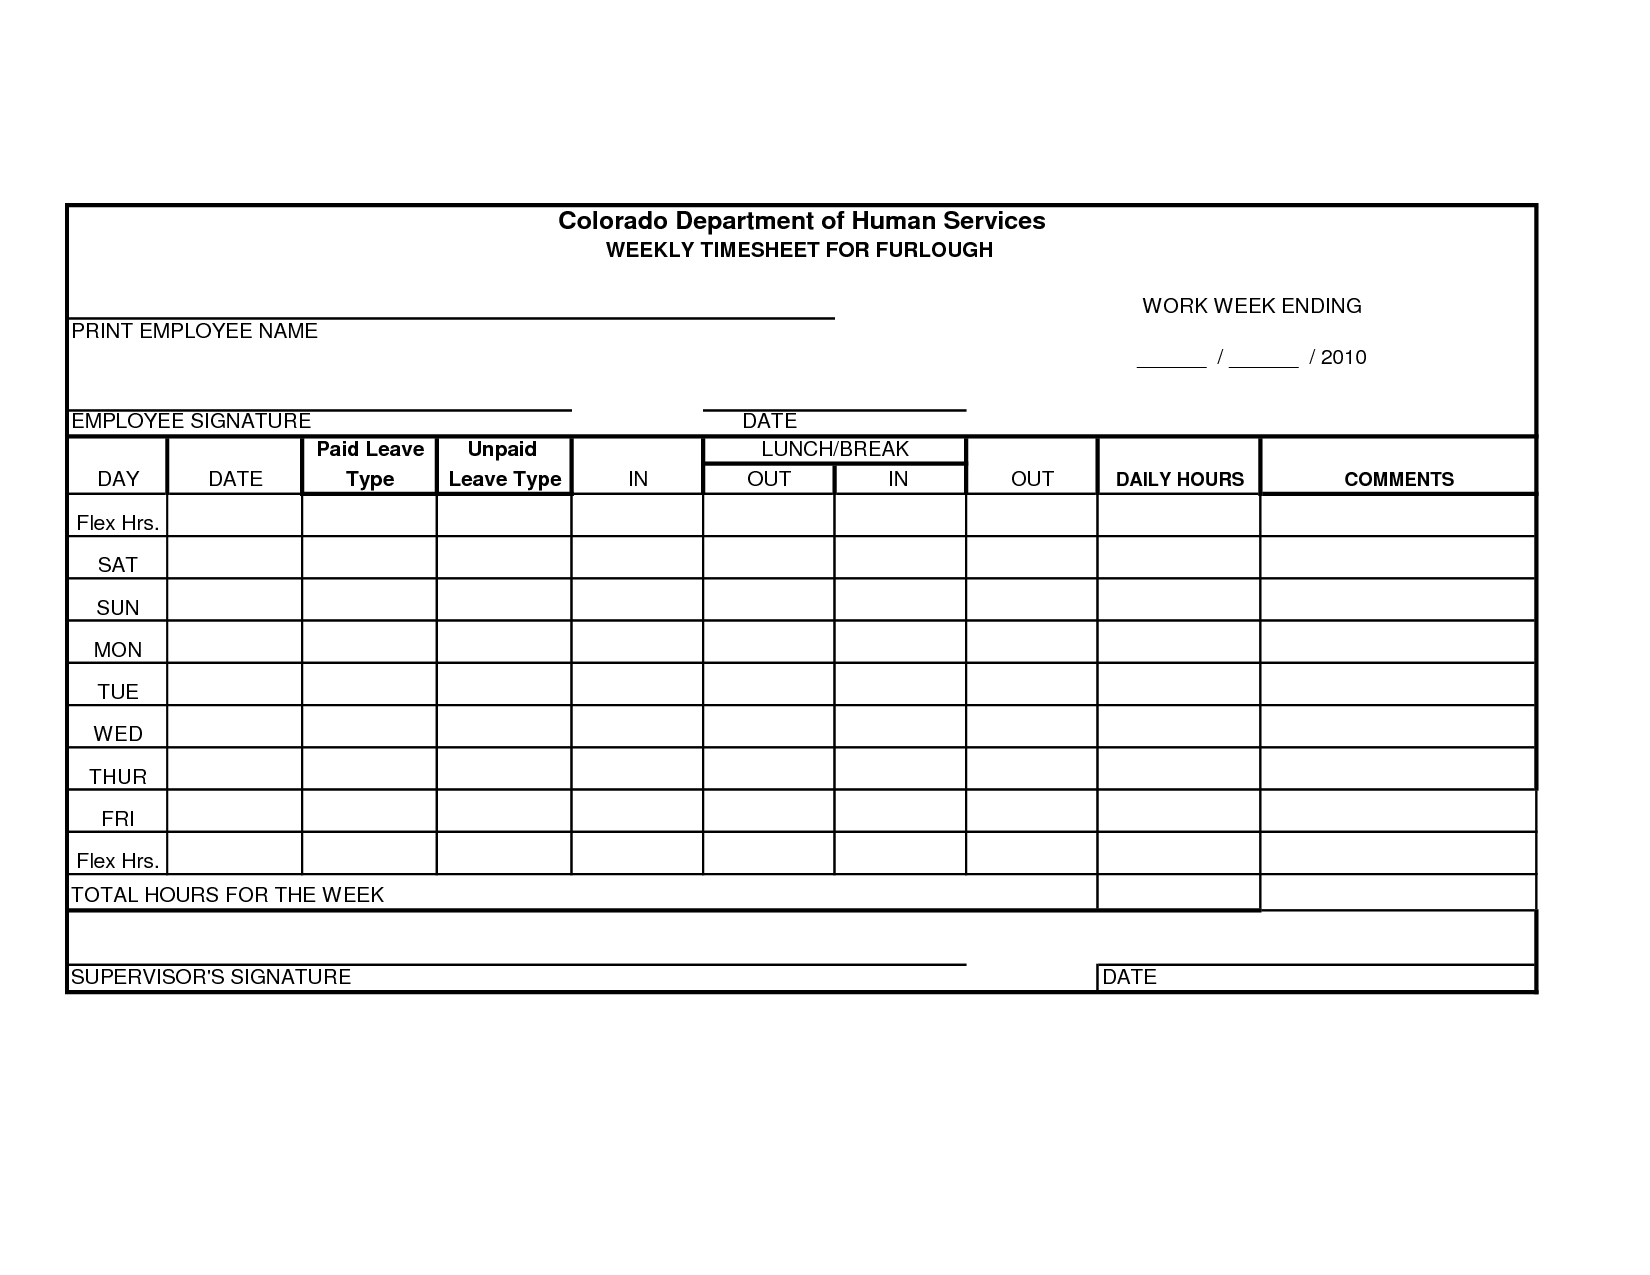 Free Printable Time Sheets Forms | Furlough Weekly Time Sheet - Time Card Templates Free Printable